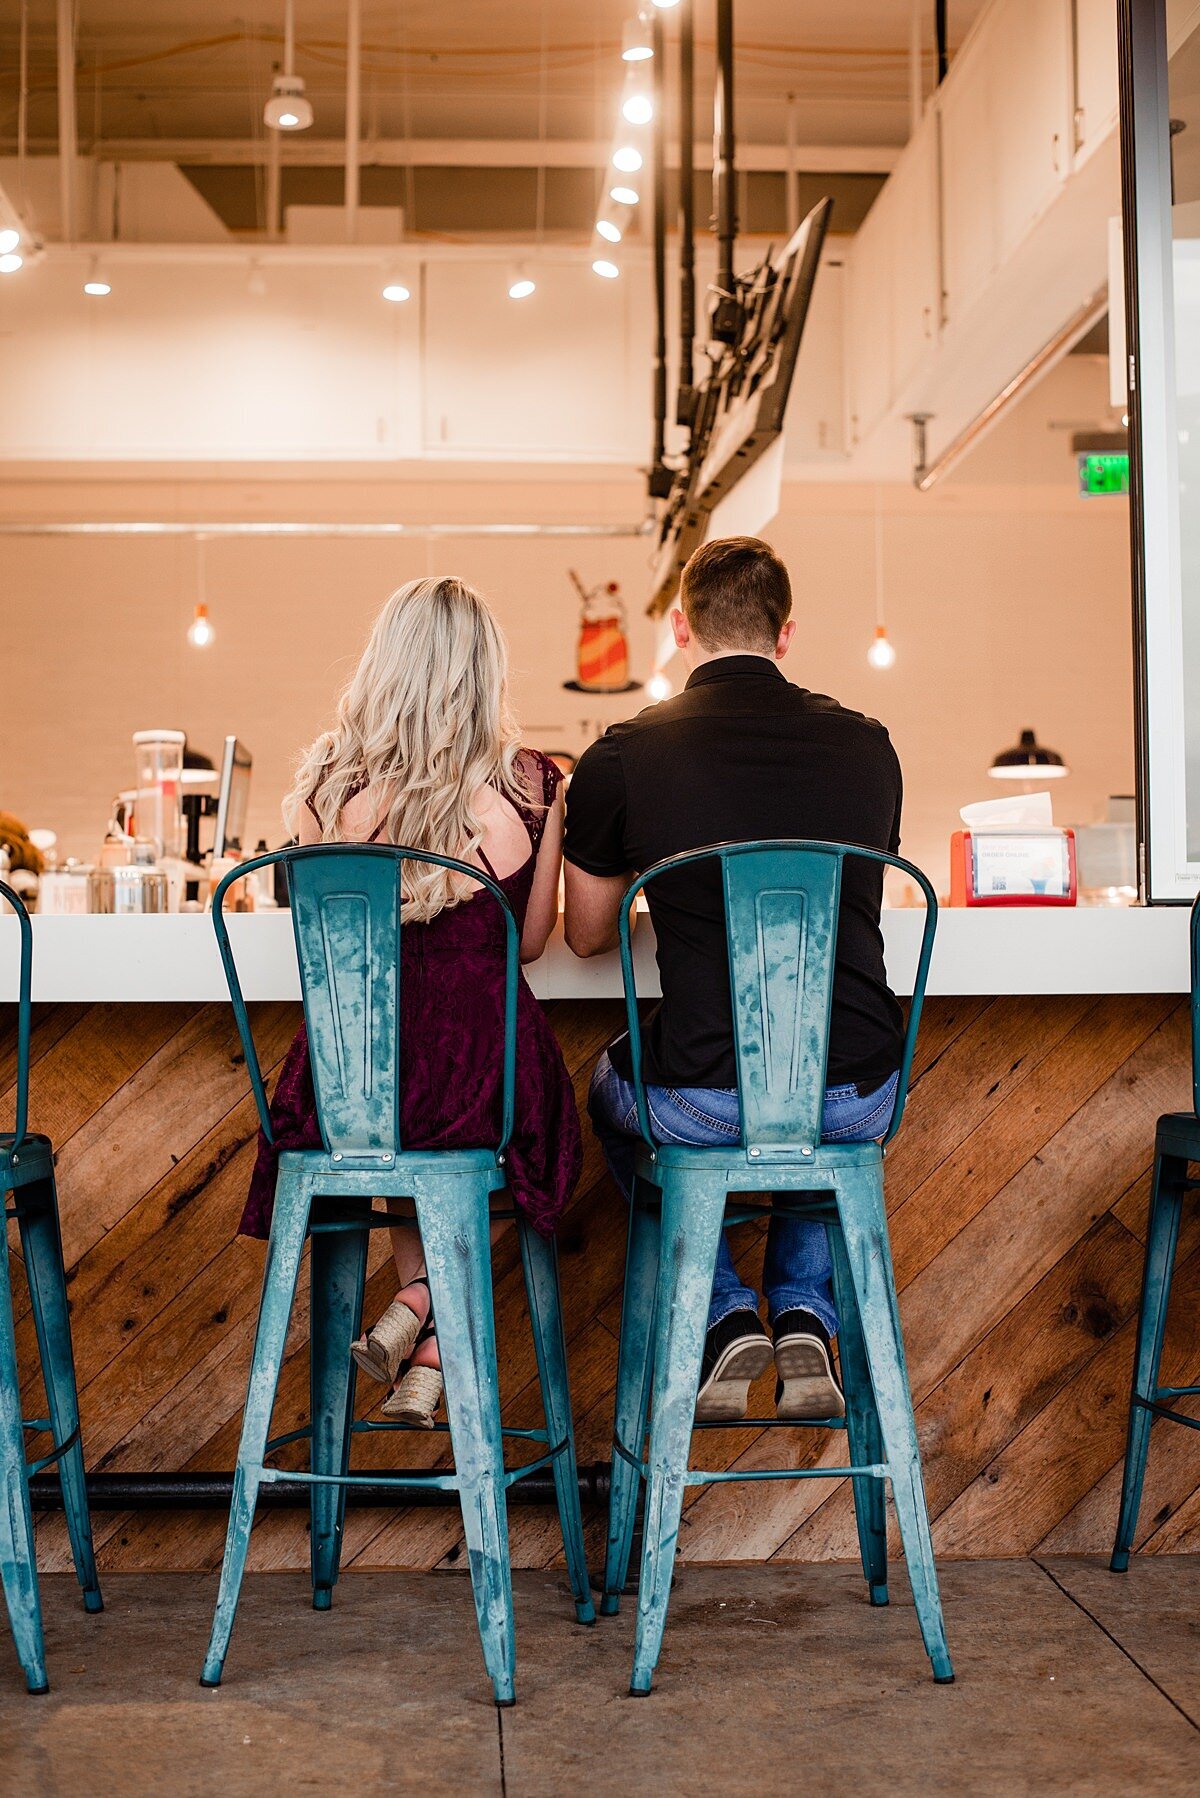 The bride and groom sit in tall teal blue chairs at a soda fountain sharing a drink. The bride is wearing a maroon dress and the groom is wearing dark wash jeans and a black shirt.